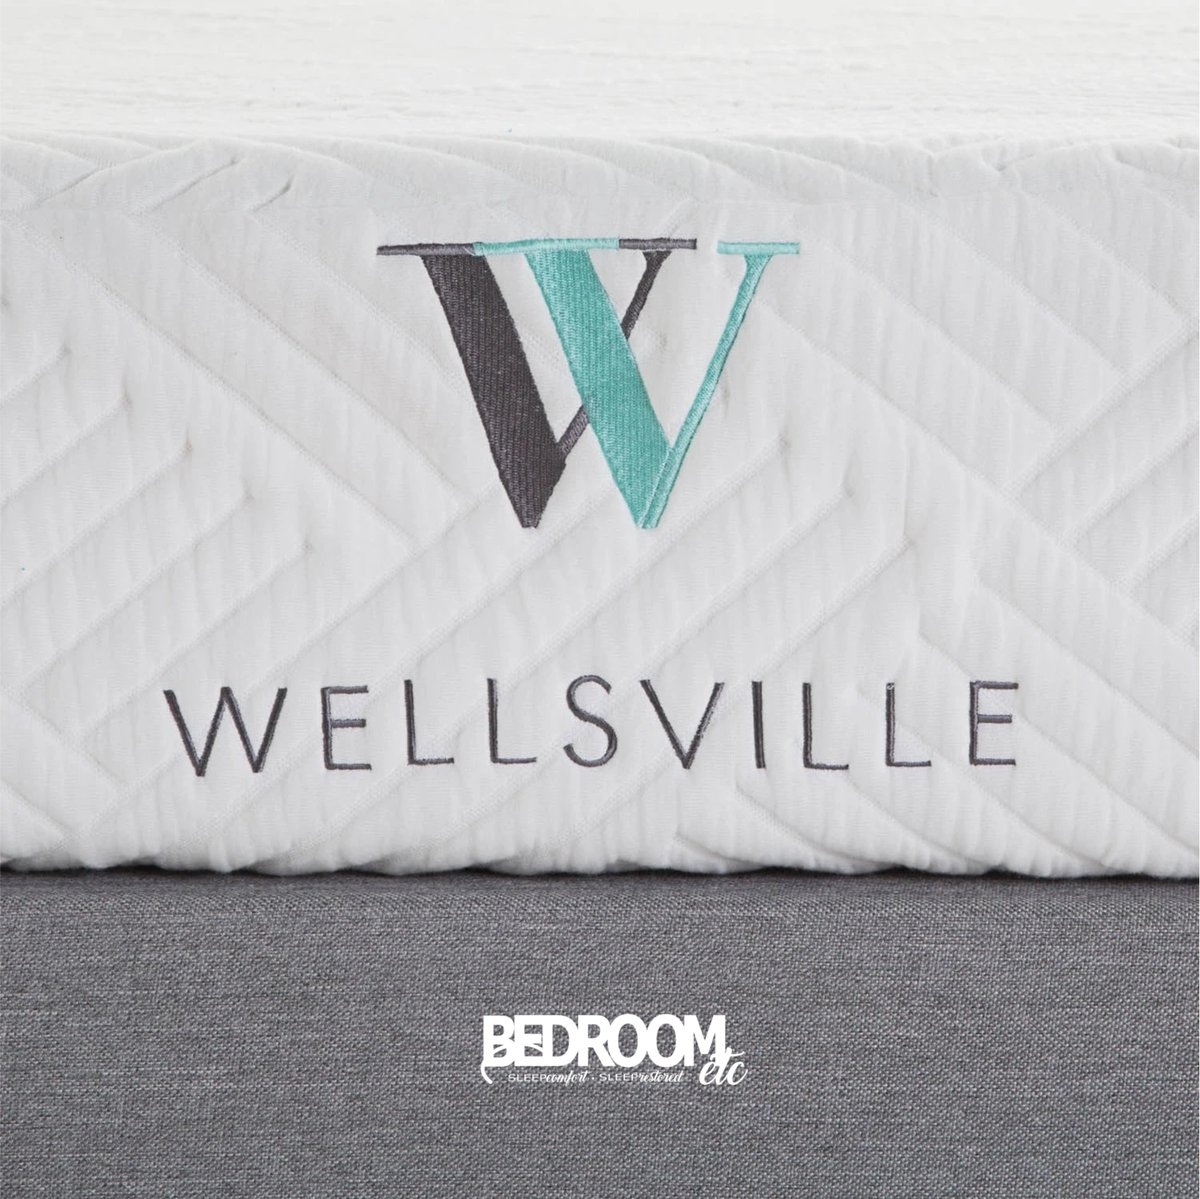 The Wellsville Double Jacquard Mattress Replacement Covers allows you to protect your mattress from liquid or stains so that it lasts longer!
----
🛍️ bit.ly/38xMeQj
.
#bedroometc #wellsvilledouble #jacquardmattress #replacementcovers #bedroom #sleepcomfort #sleeprestored